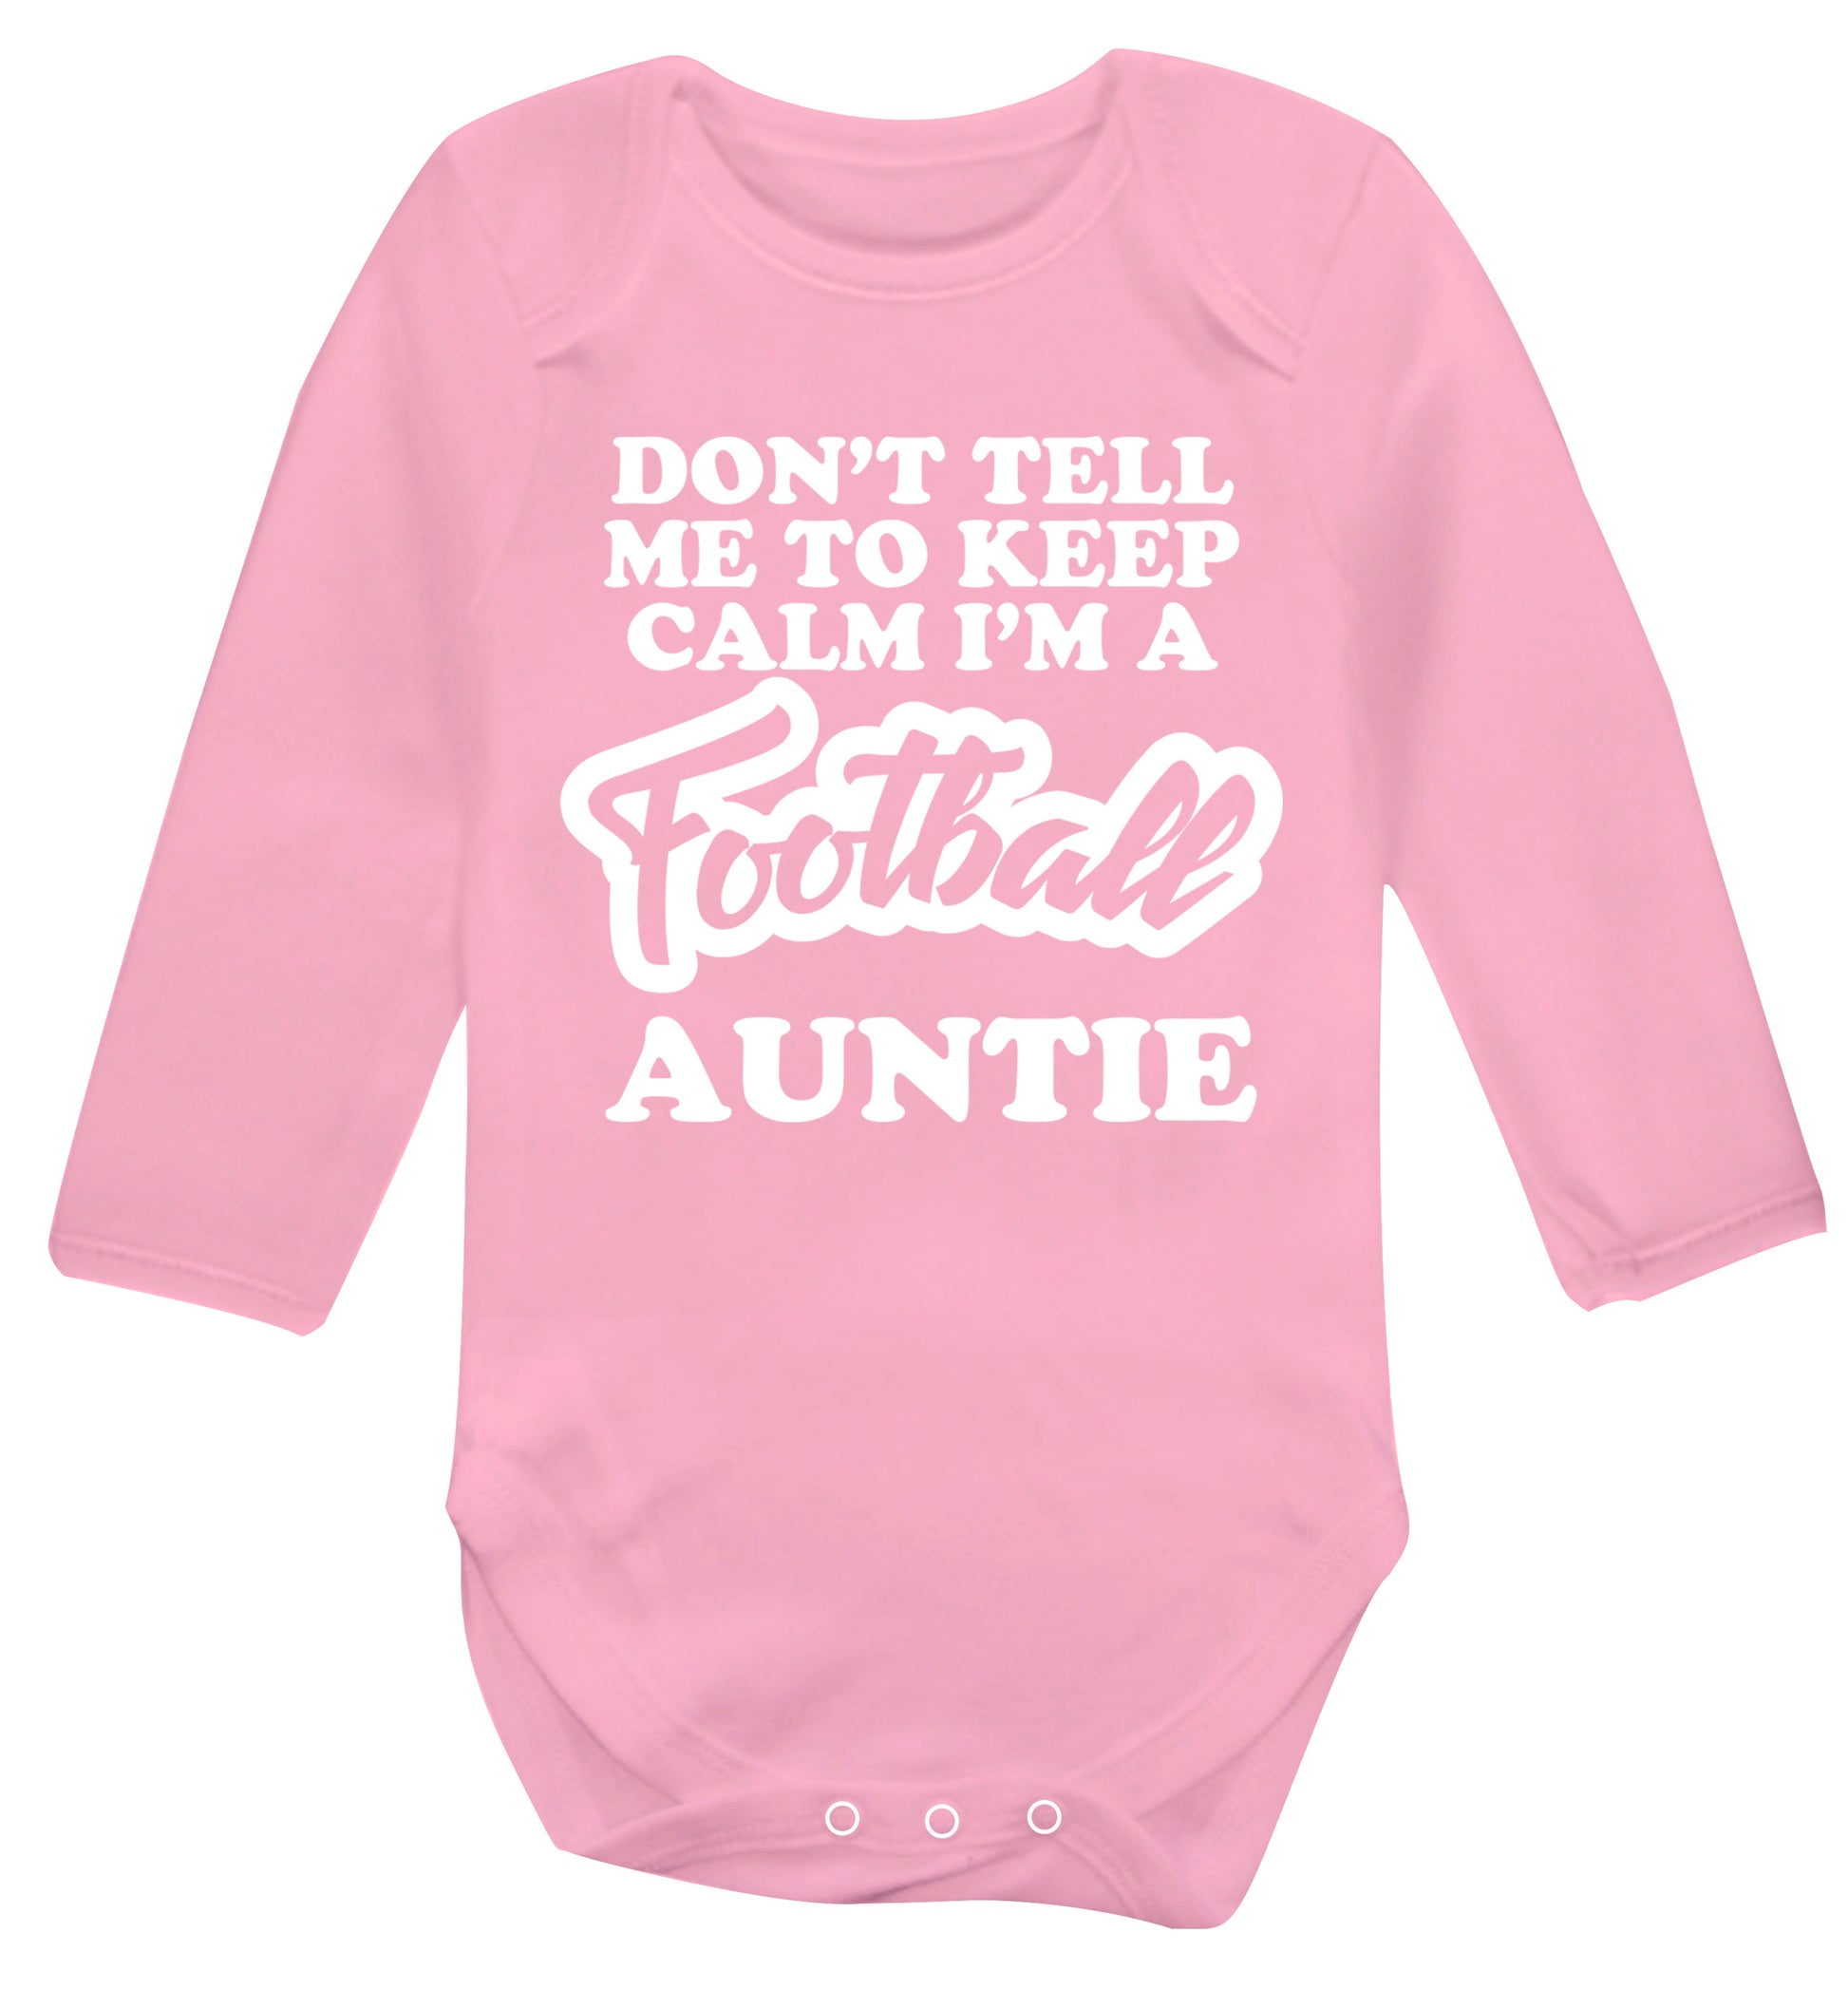 Don't tell me to keep calm I'm a football auntie Baby Vest long sleeved pale pink 6-12 months